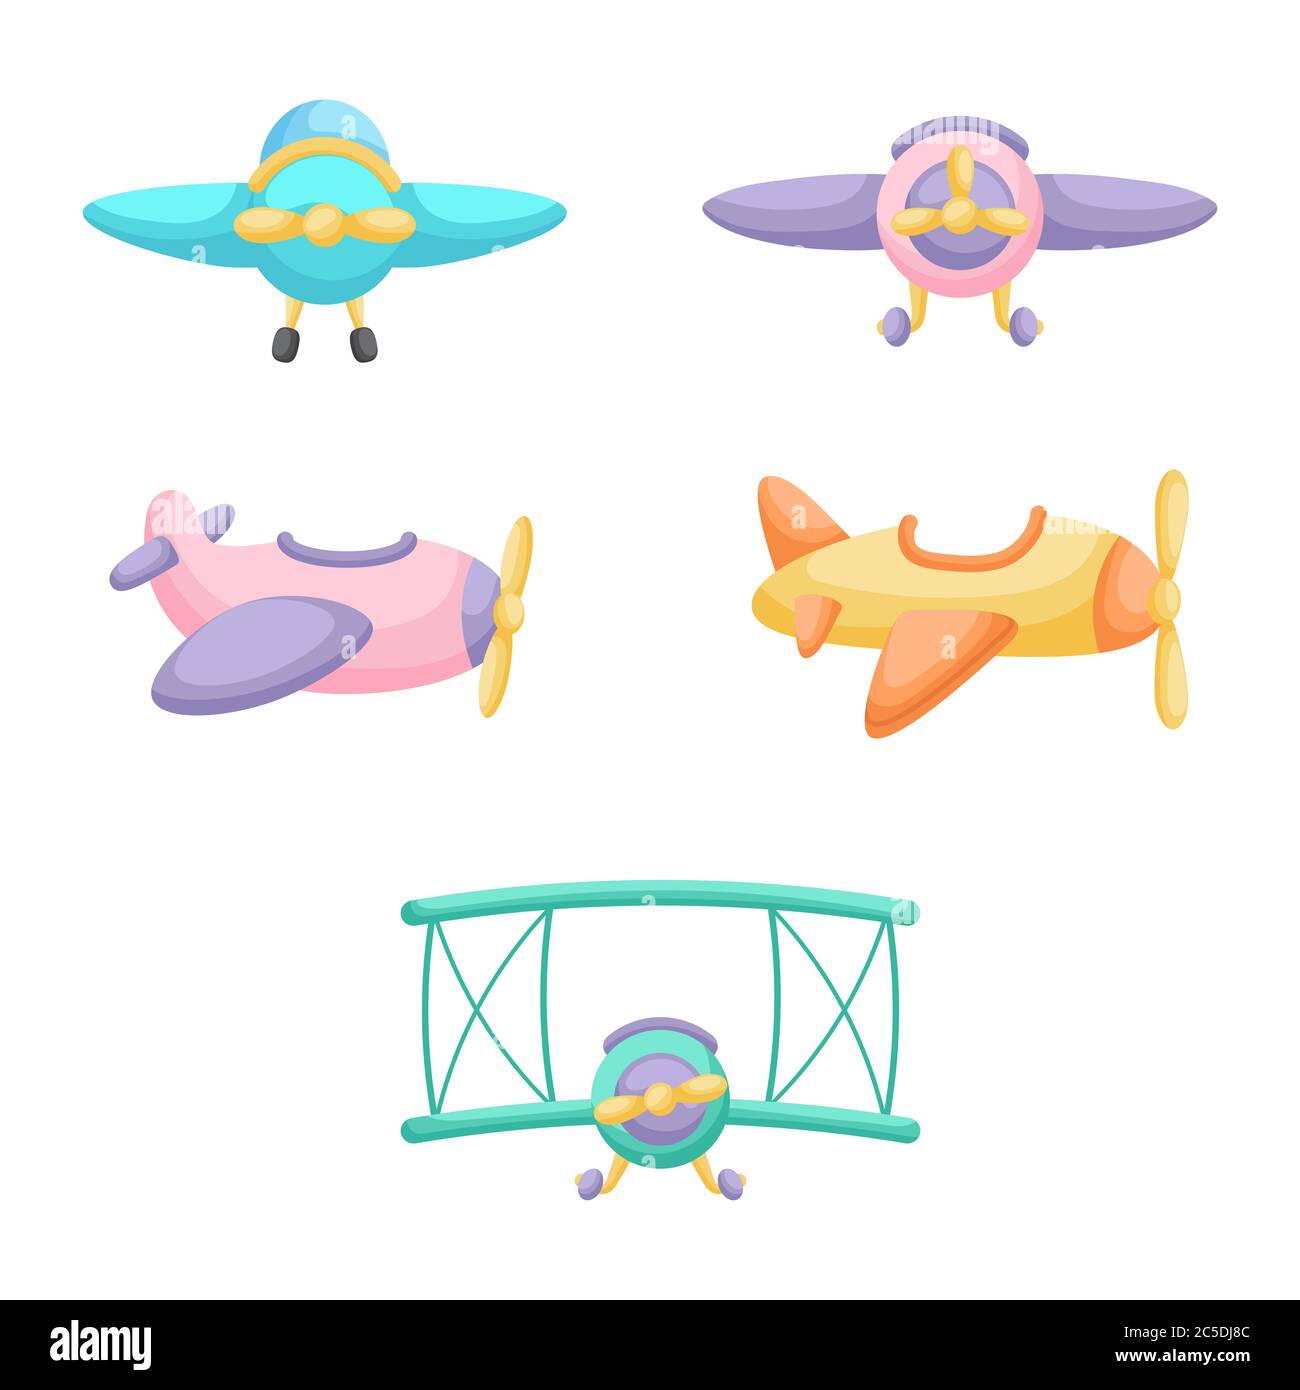 Collection of cute cartoon baby's planes isolated on white background. Set of different models of planes for design of kid's rooms clothing textiles Stock Vector